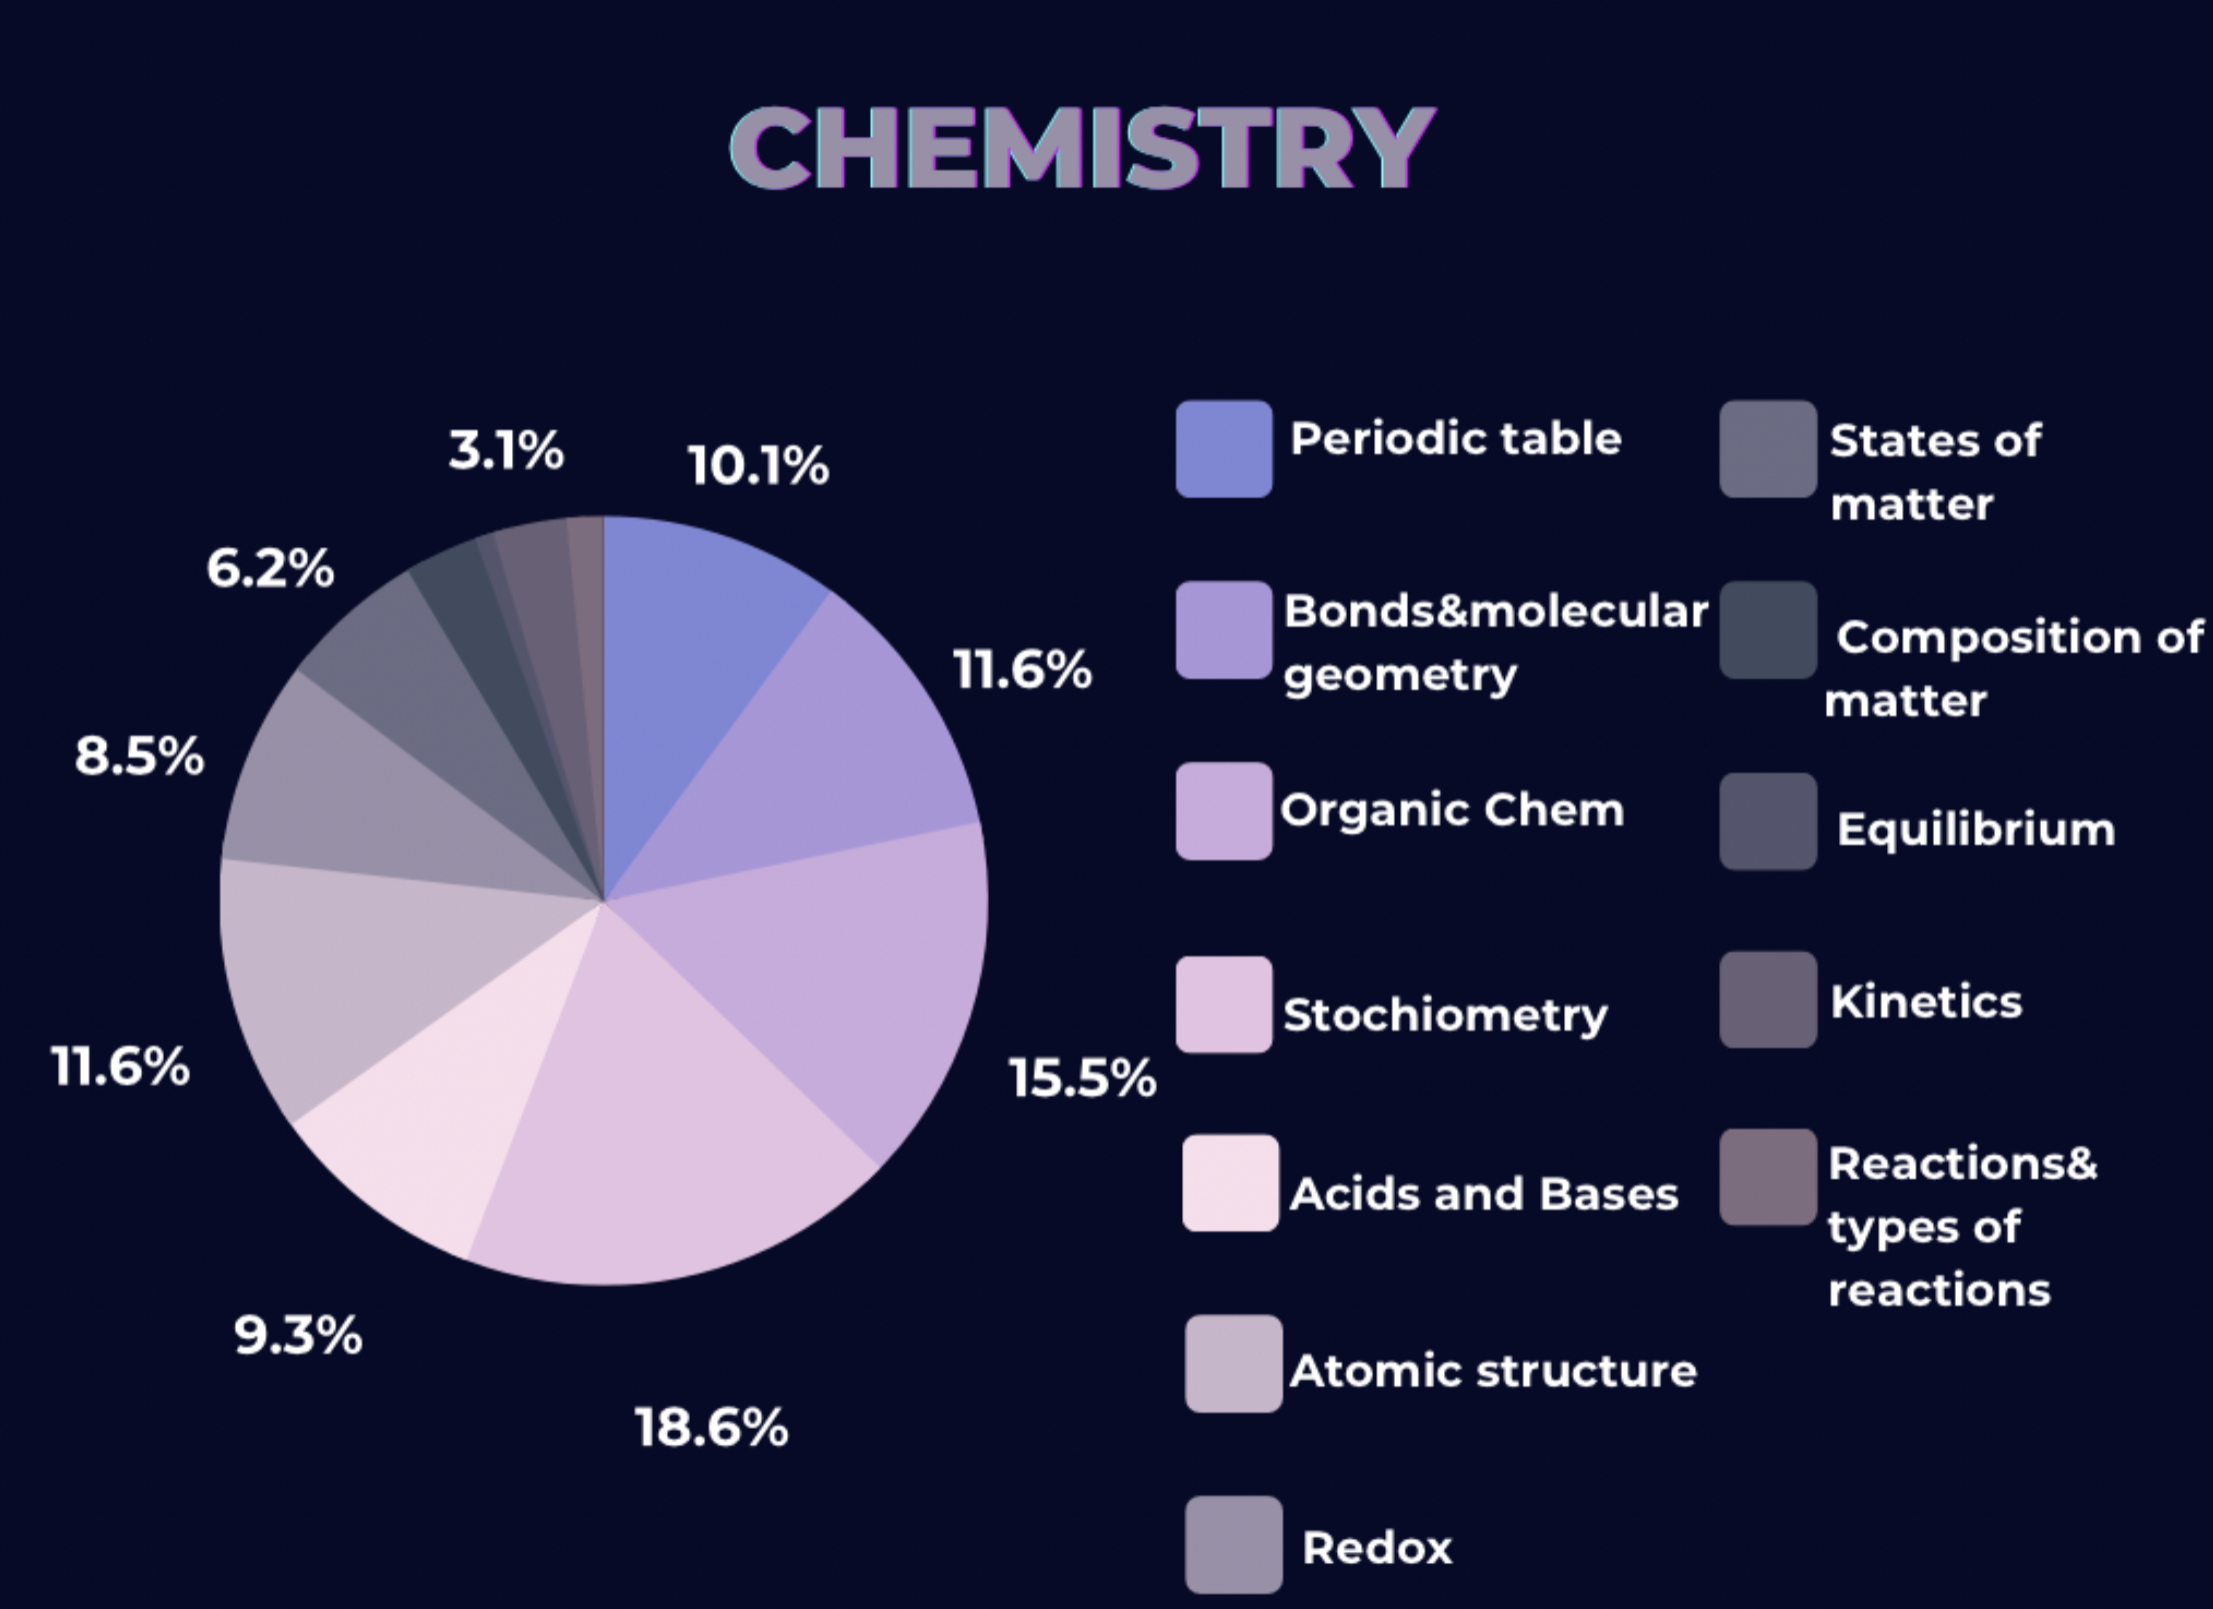 IMAT chemistry section breakdown from 2011 to 2022